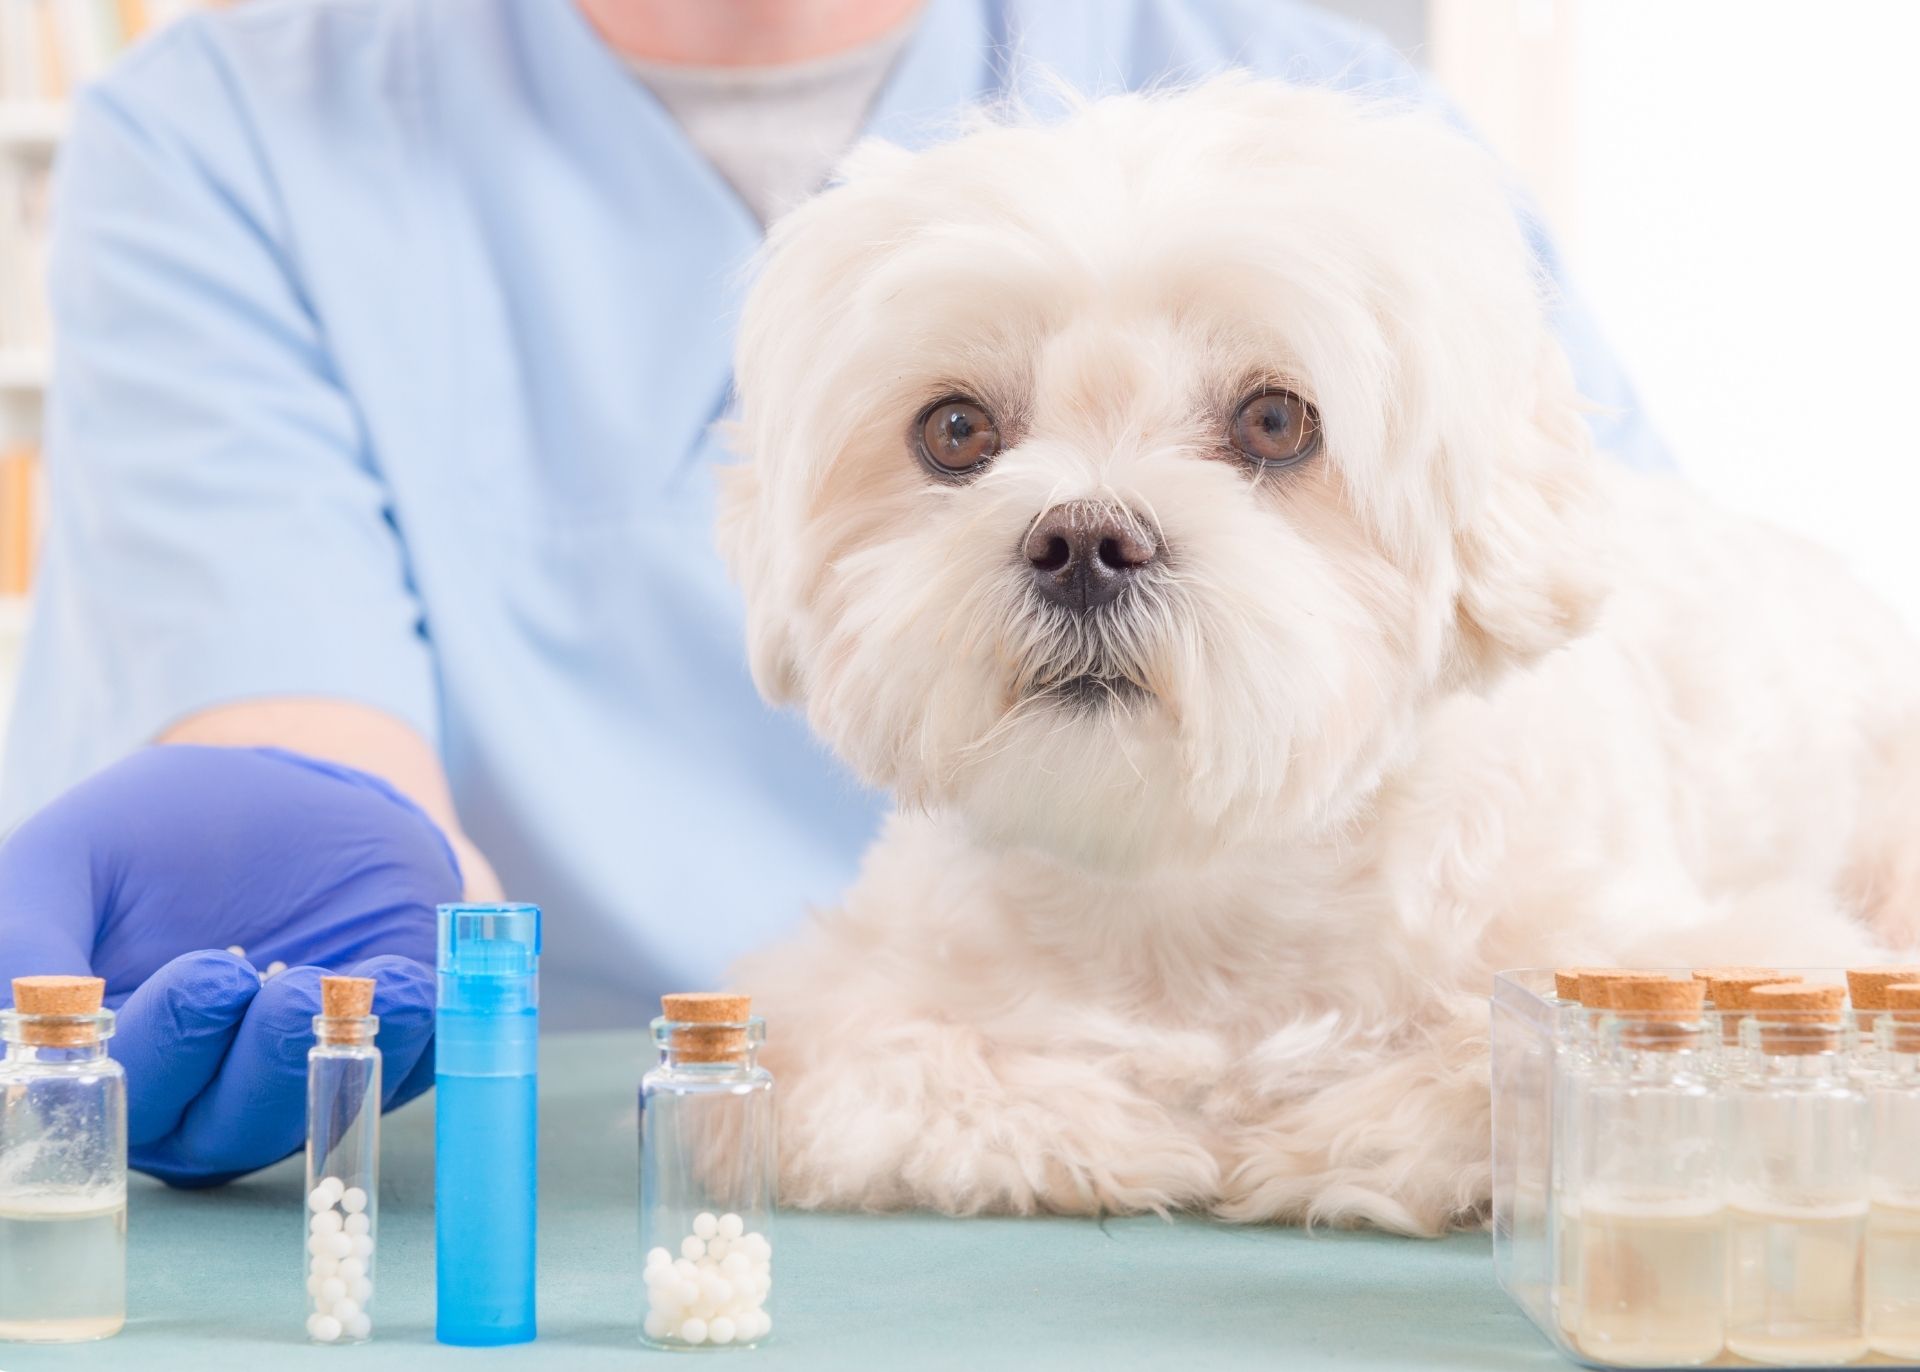 White small breed dog held by torso in blue t-shirt looking at several blue pill bottles